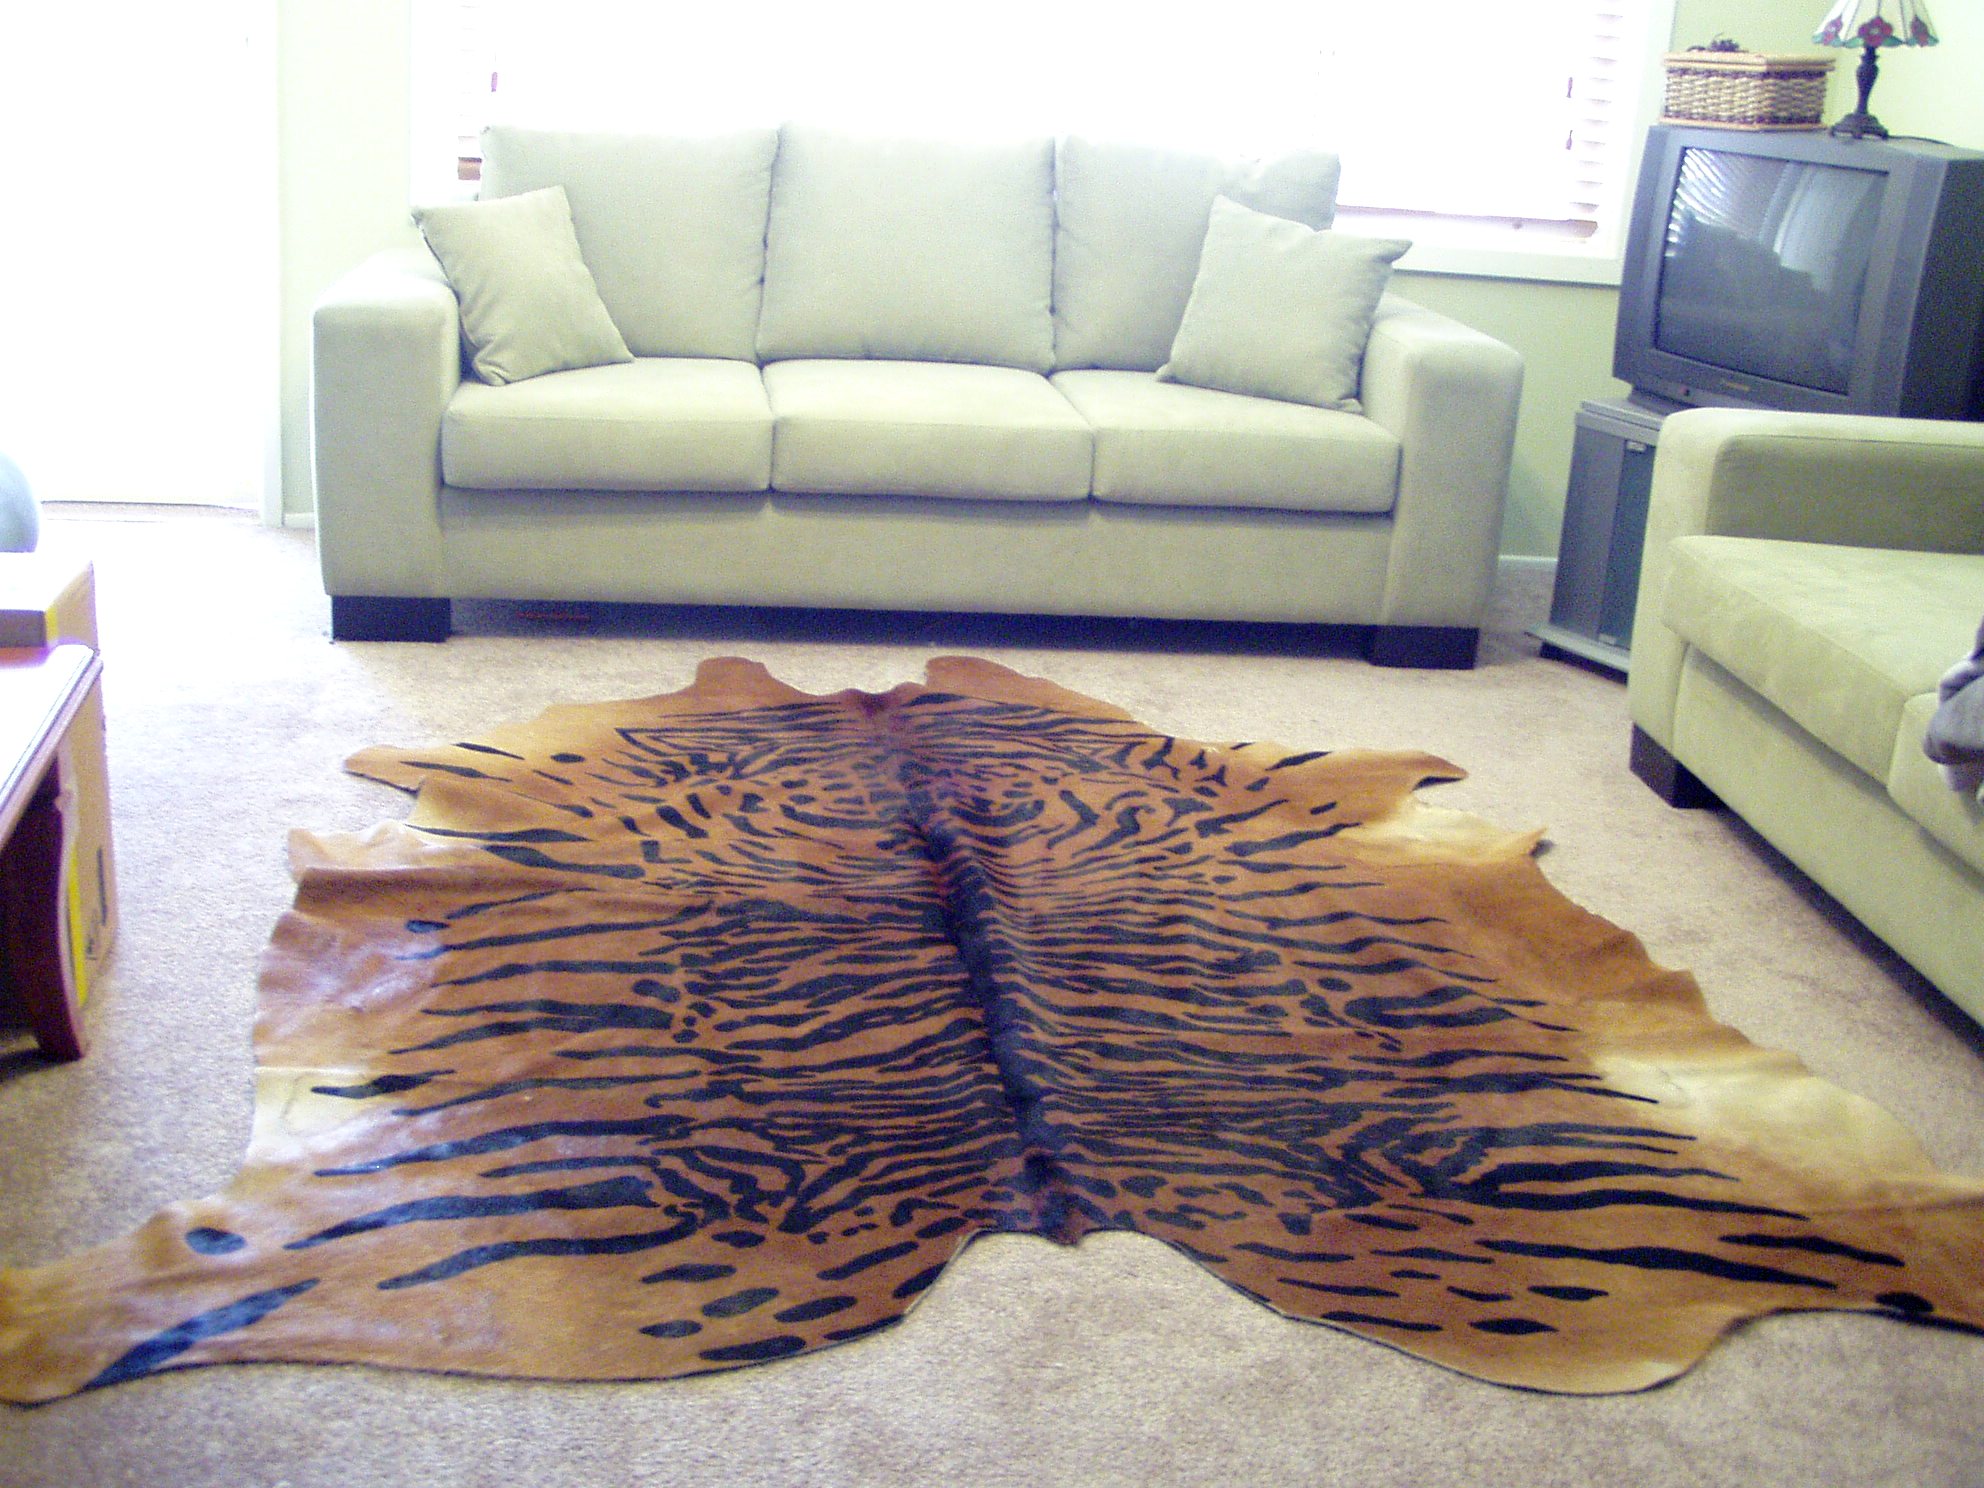 DELUXE BENGAL TIGER COWHIDE:$400